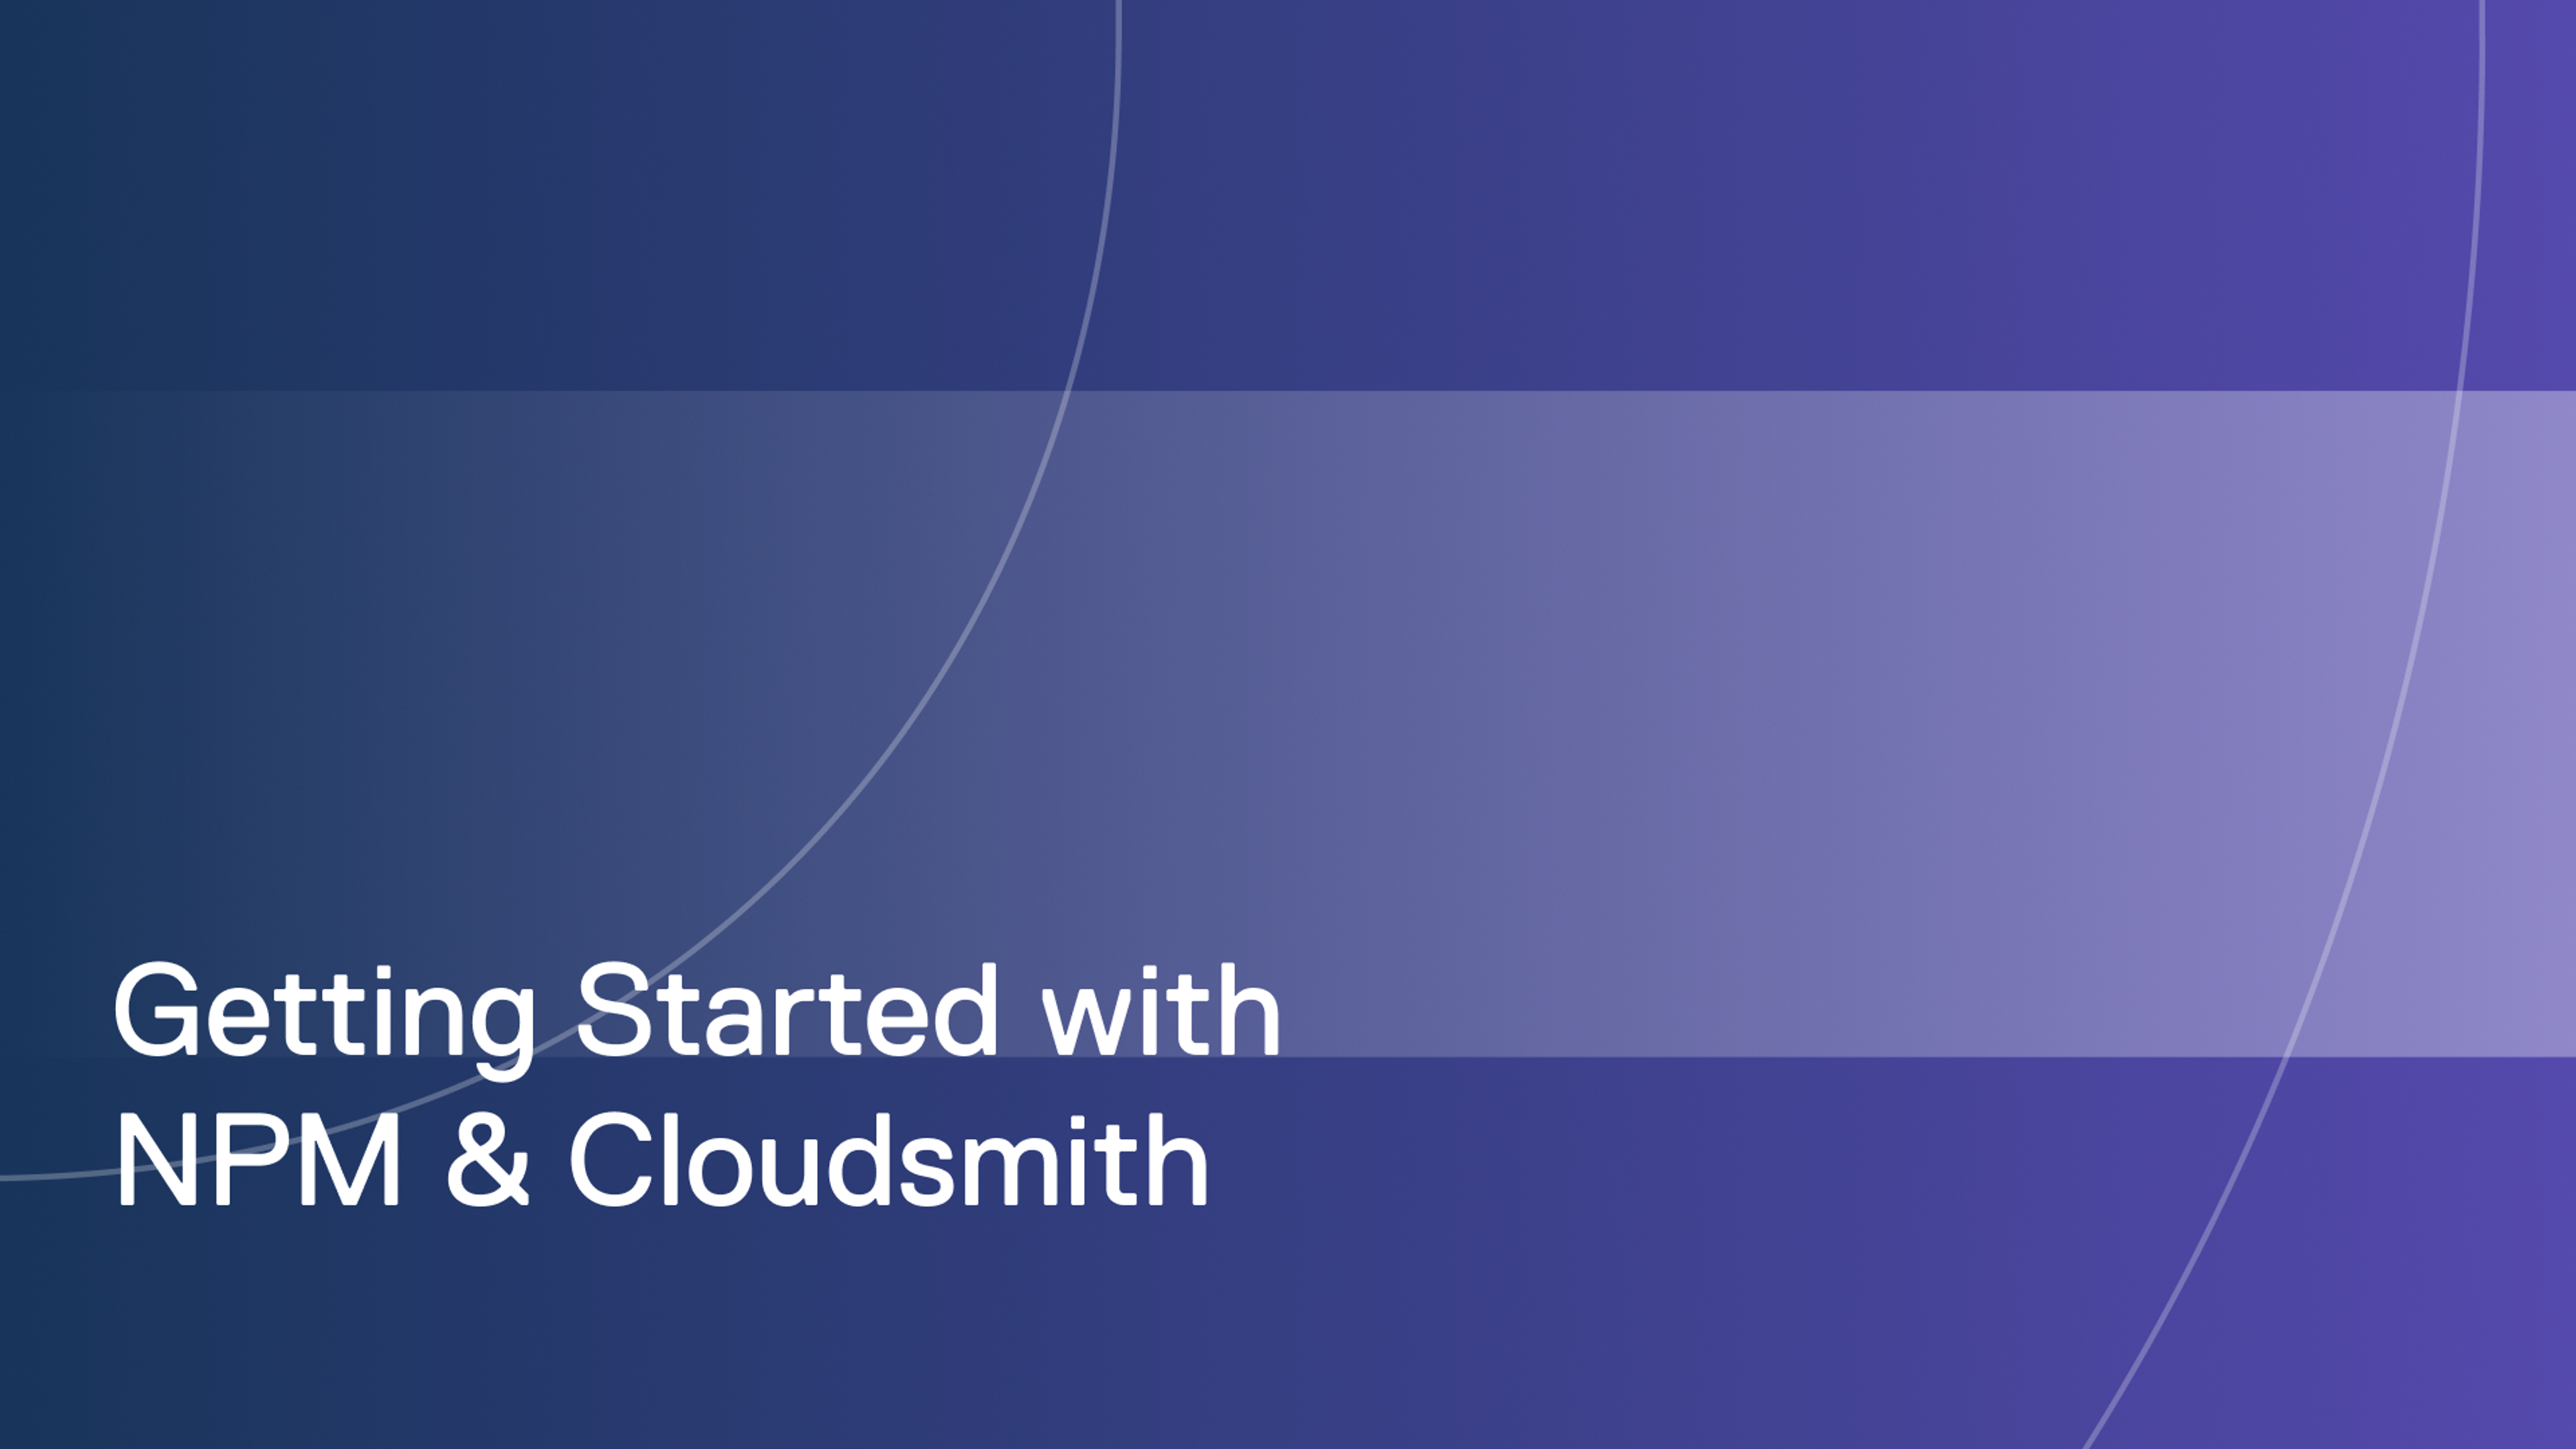 Getting started with NPM and Cloudsmith